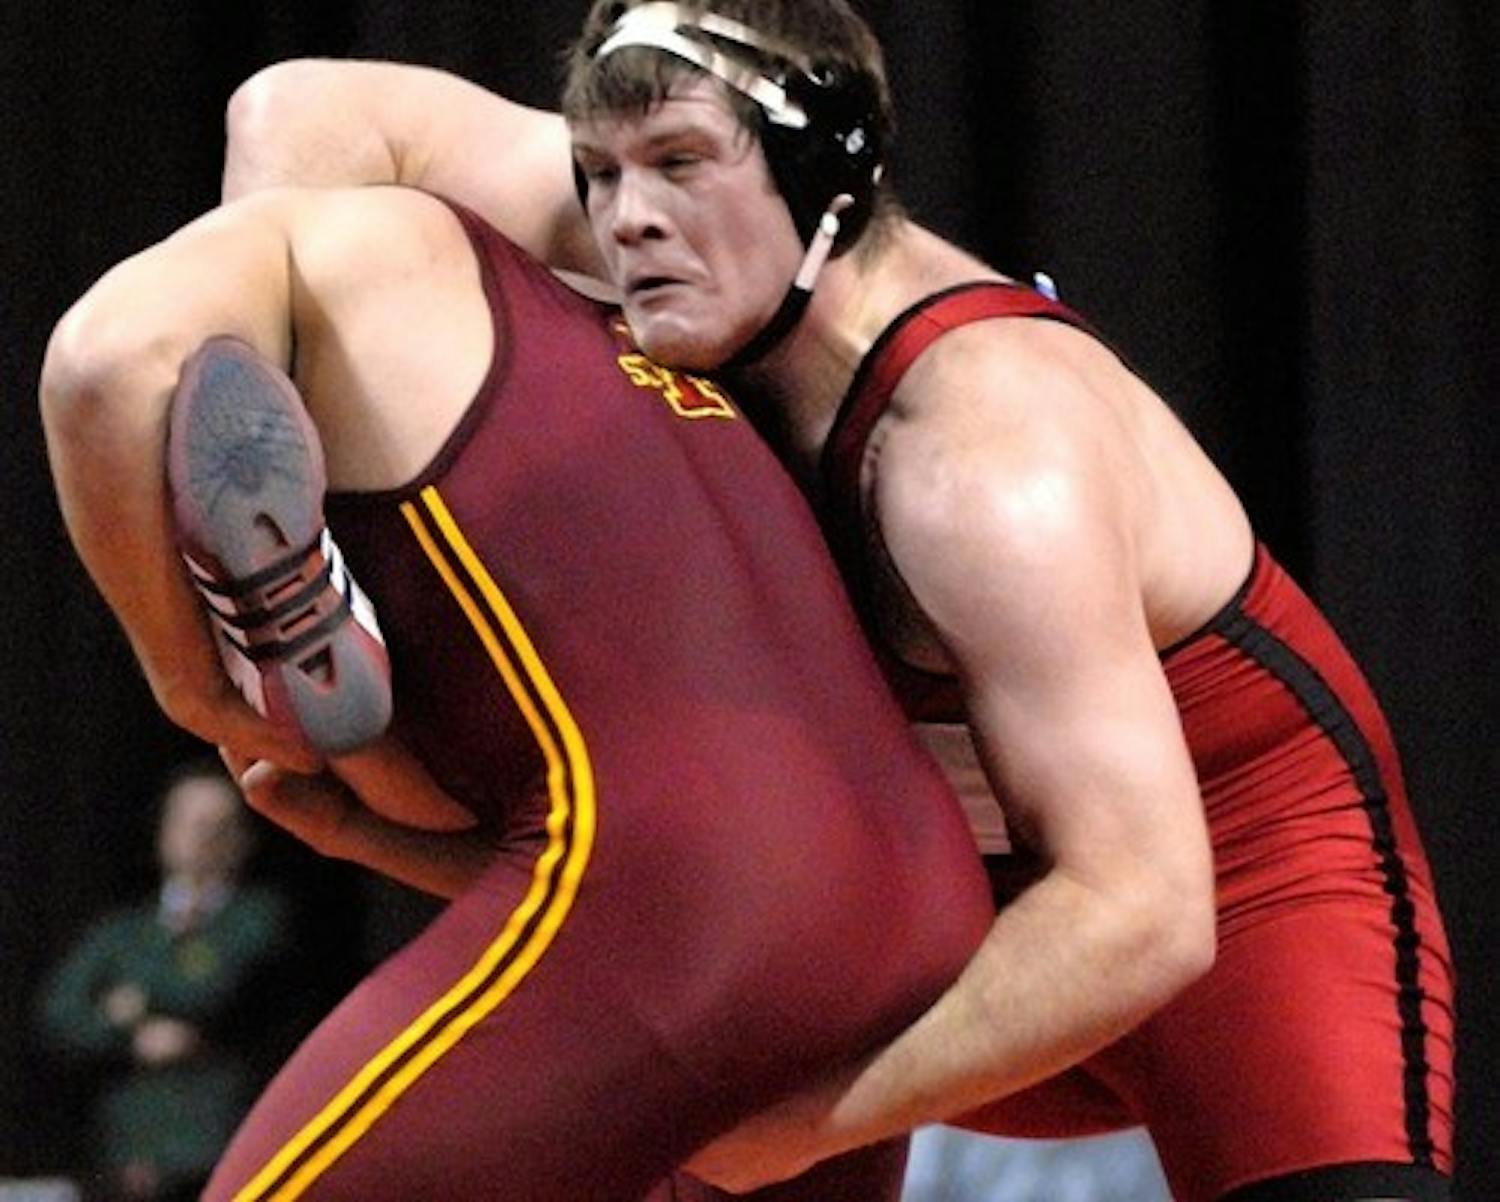 Wisconsin wrestling finishes in 13th place at the Cliff Keen Invitational